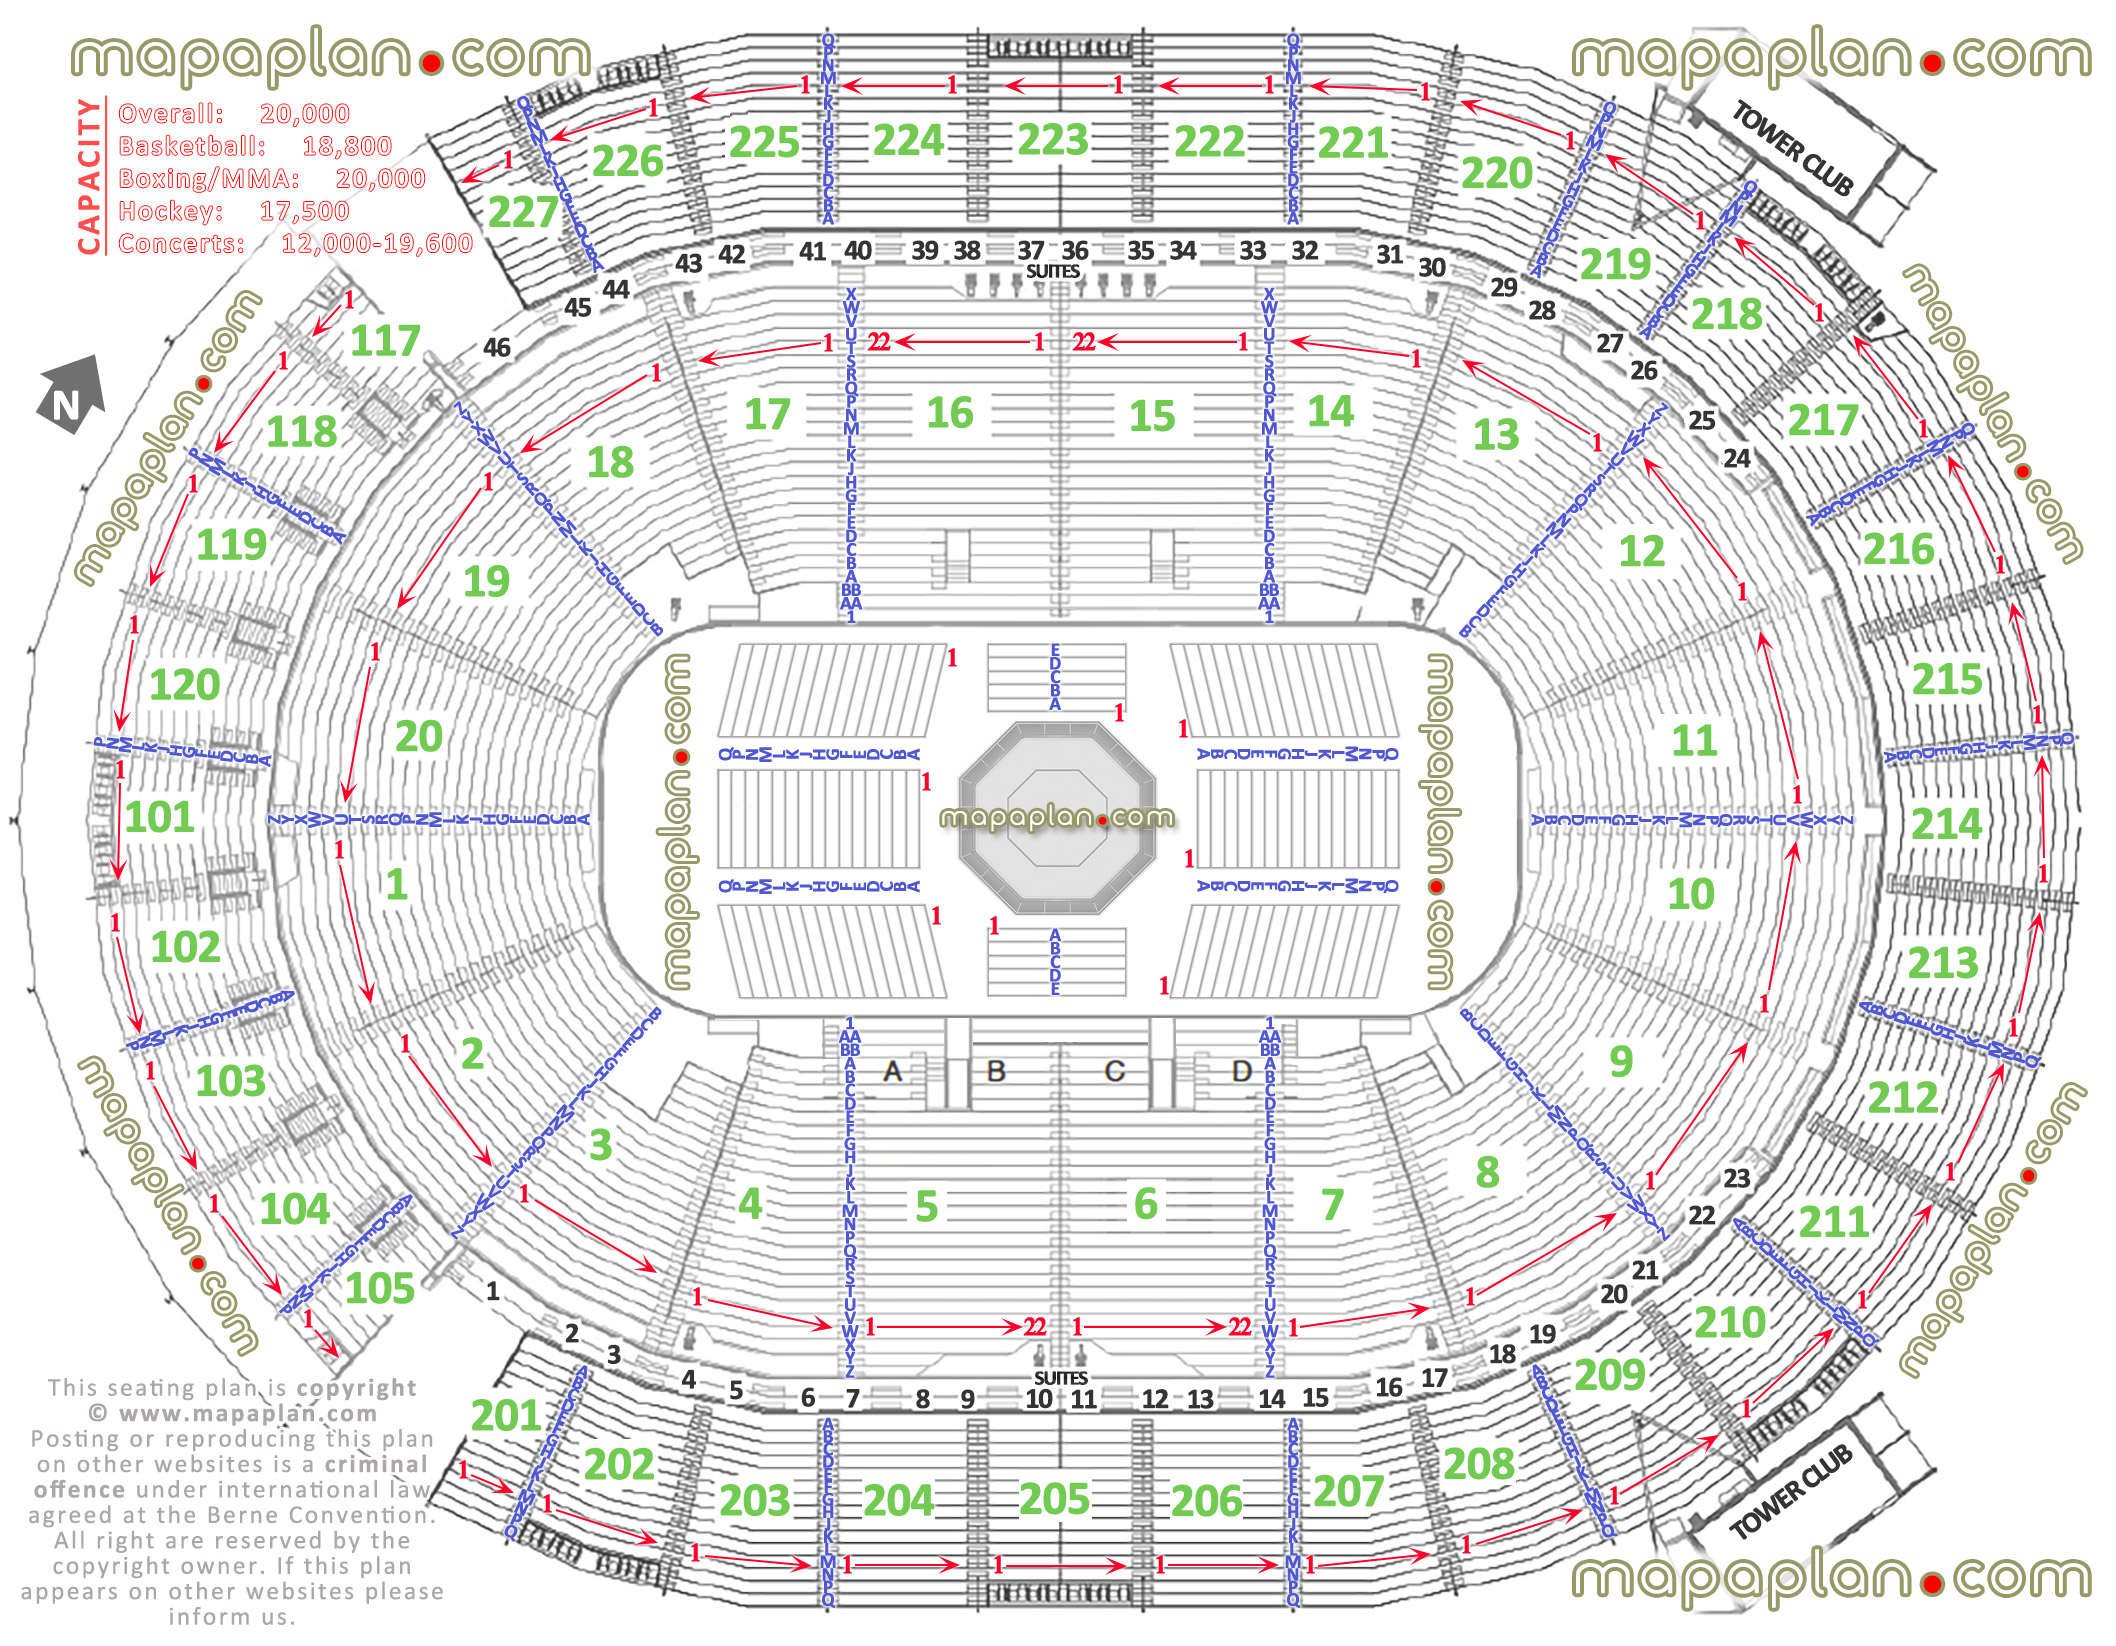 seating chart with row & max seat capacity numbers showing how many row...